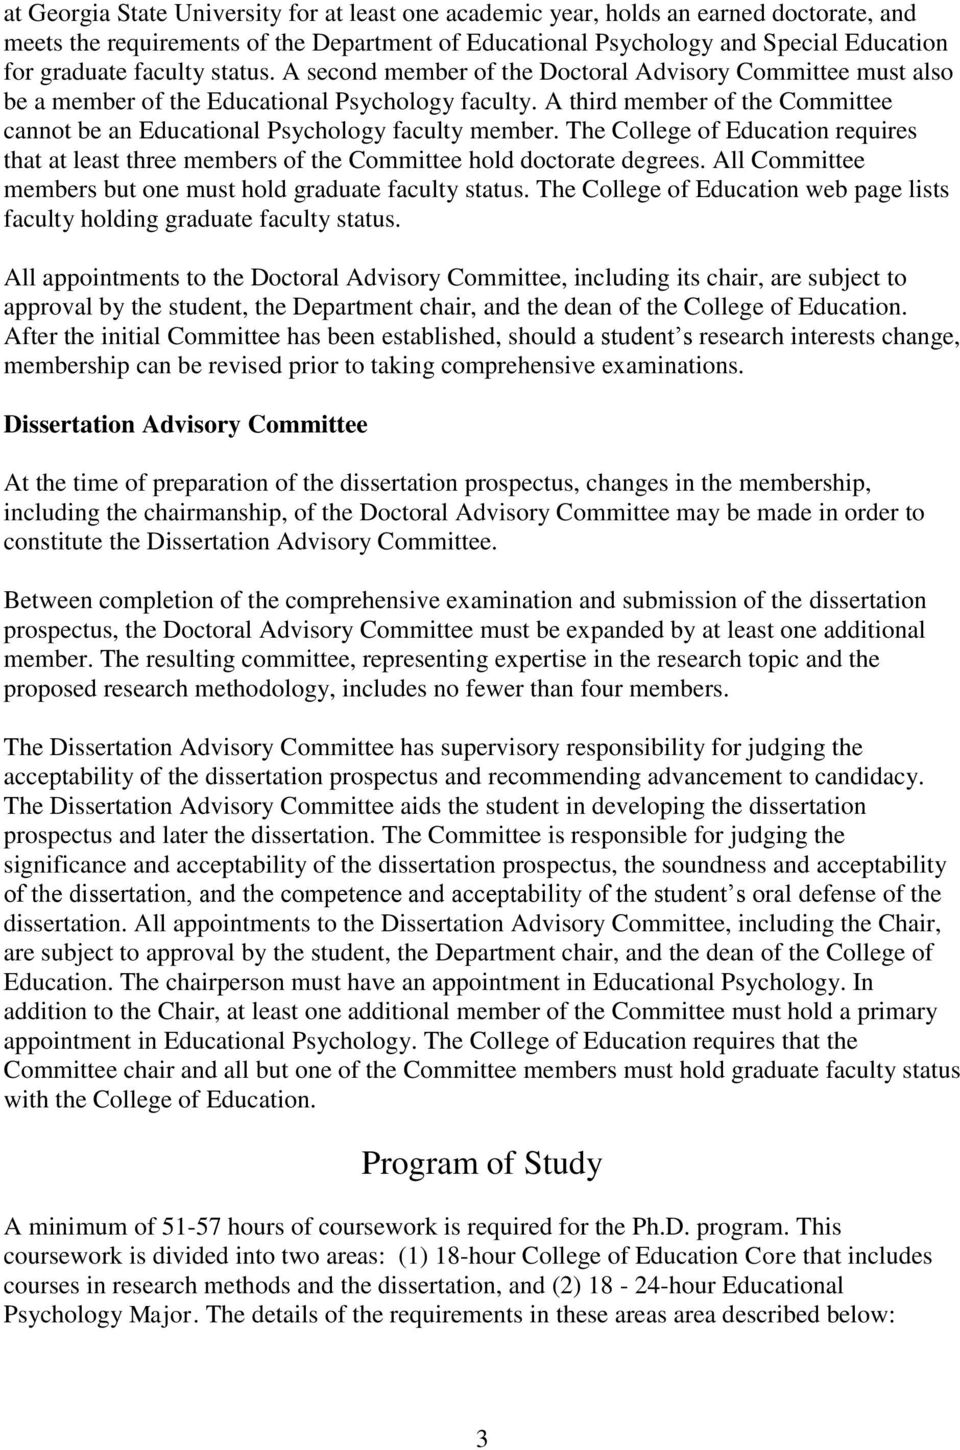 A third member of the Committee cannot be an Educational Psychology faculty member. The College of Education requires that at least three members of the Committee hold doctorate degrees.